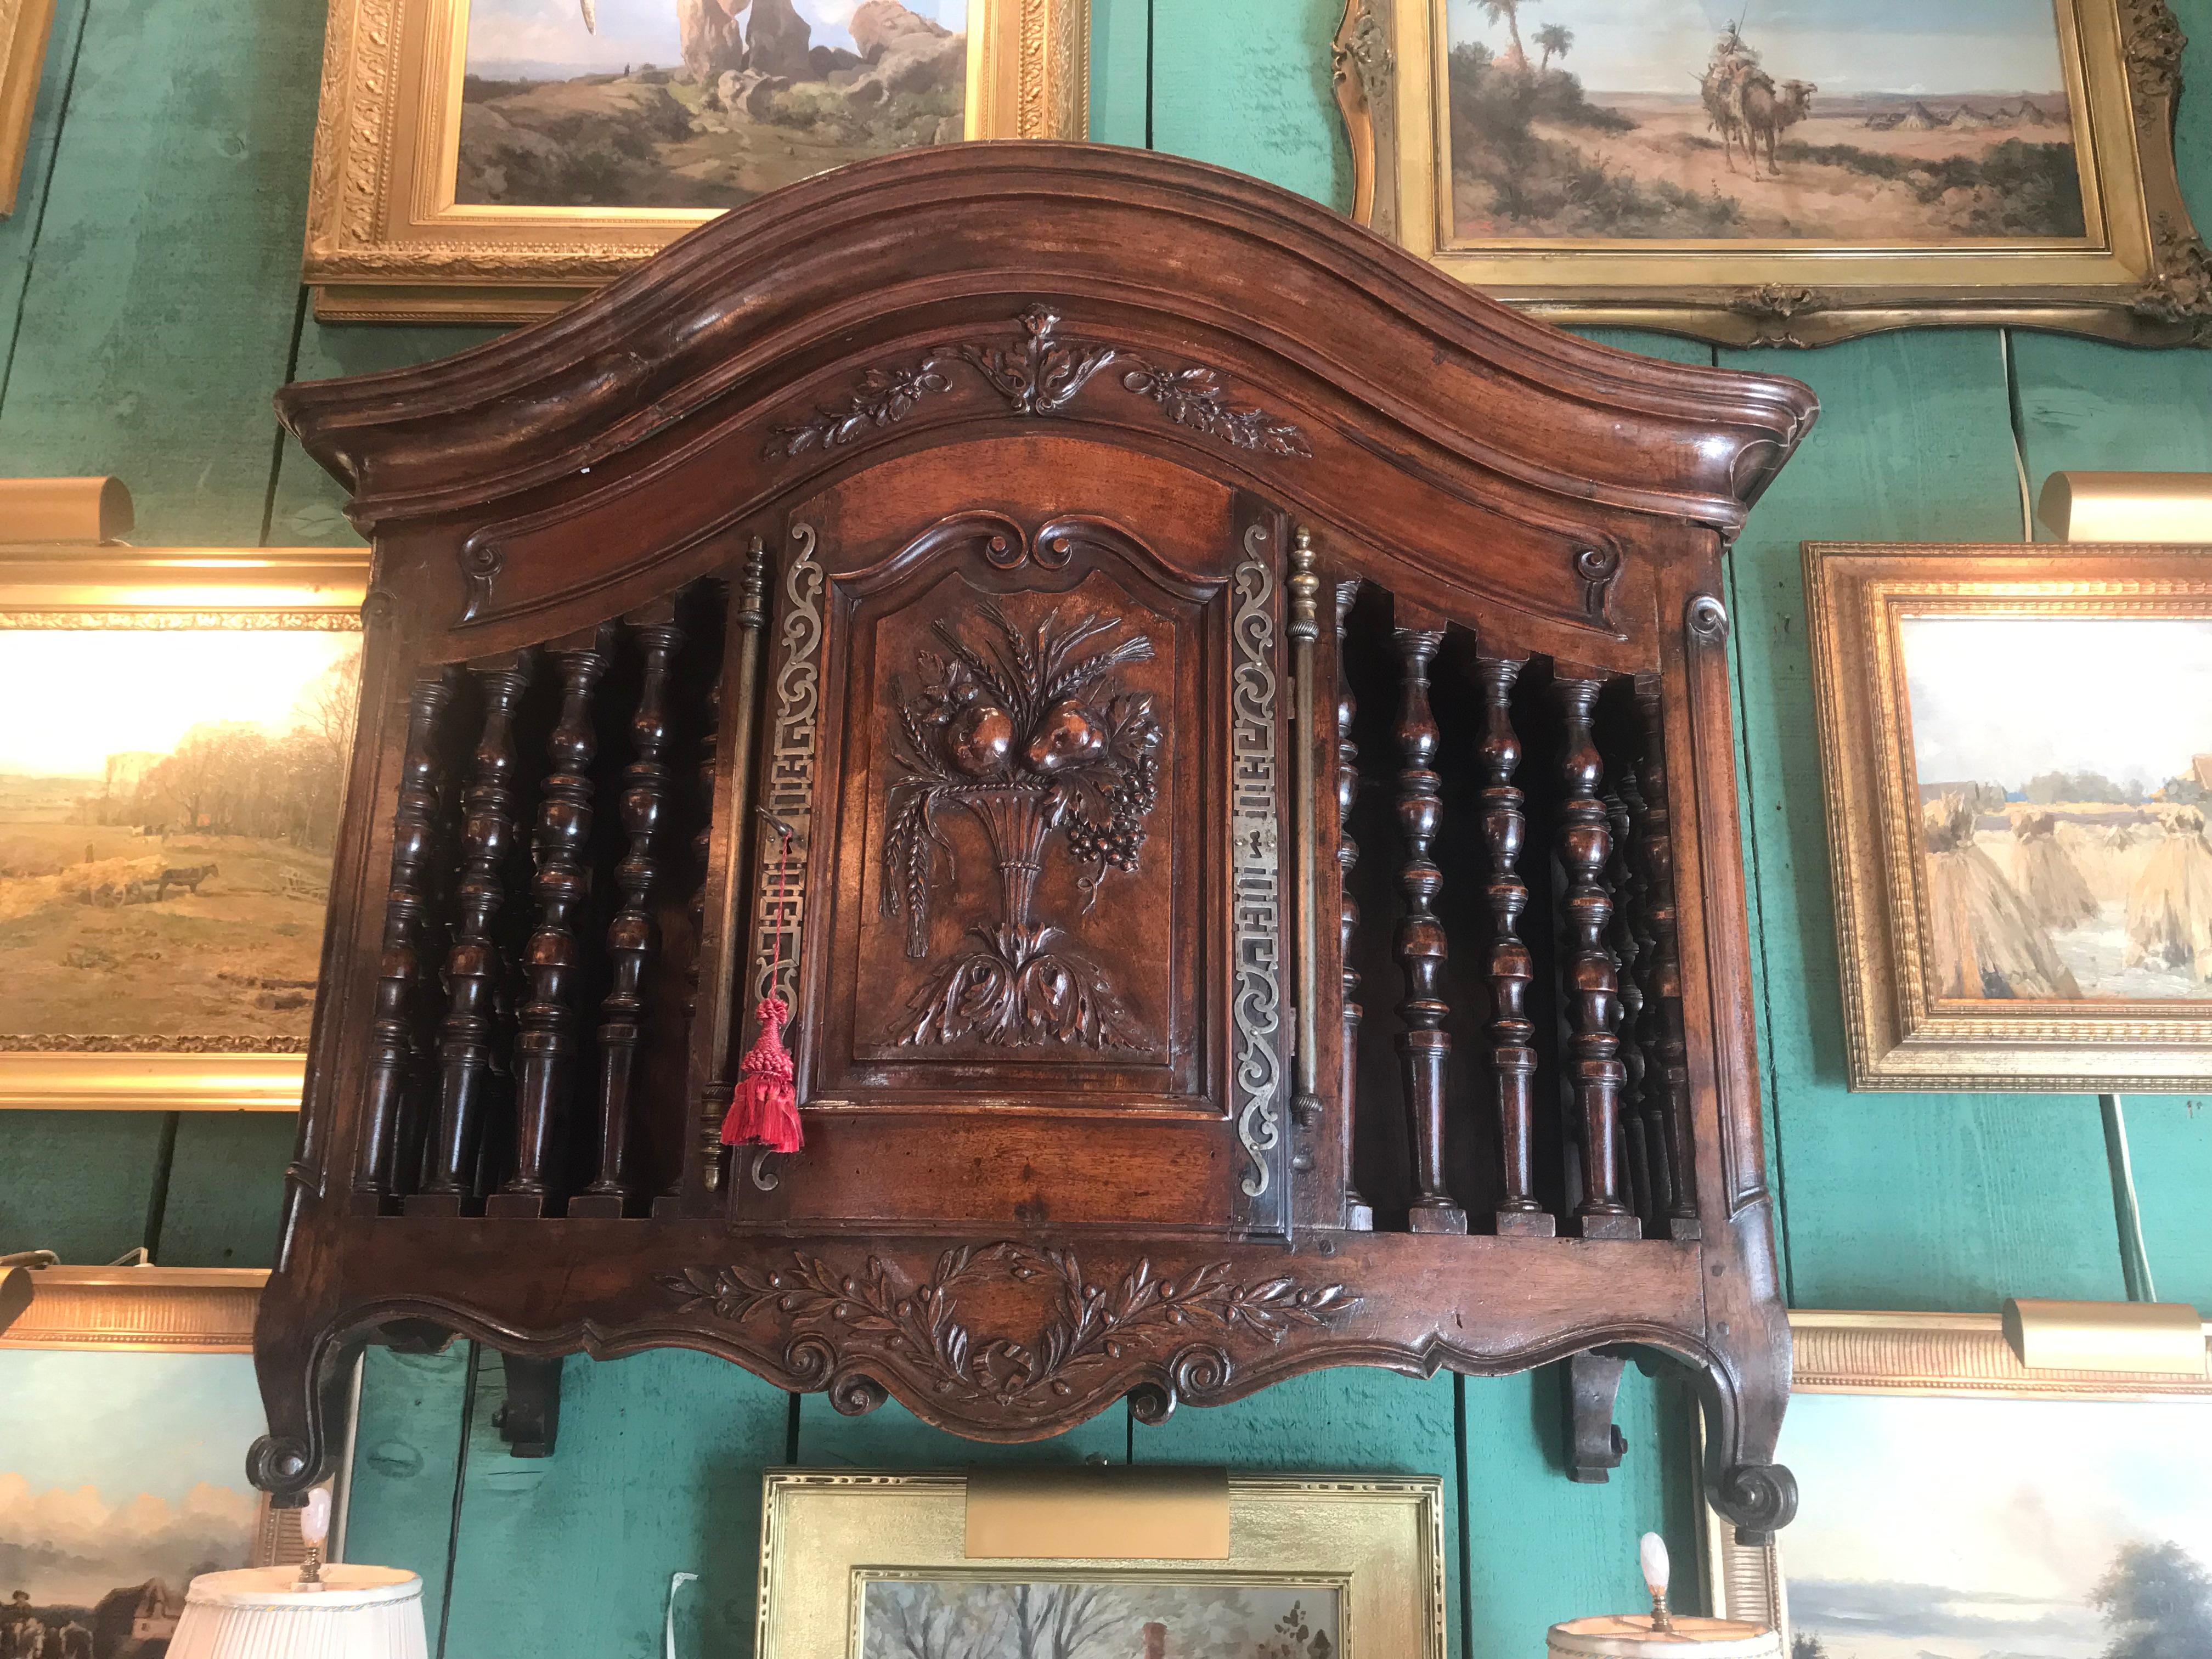 18th century exquisite Louis XV panetiere
Originally used to store French baguettes or long loaves of bread, panetieres were meant to sit on a petrin (dough chest) but eventually grew into elaborate decorative pieces which hung on the wall. This